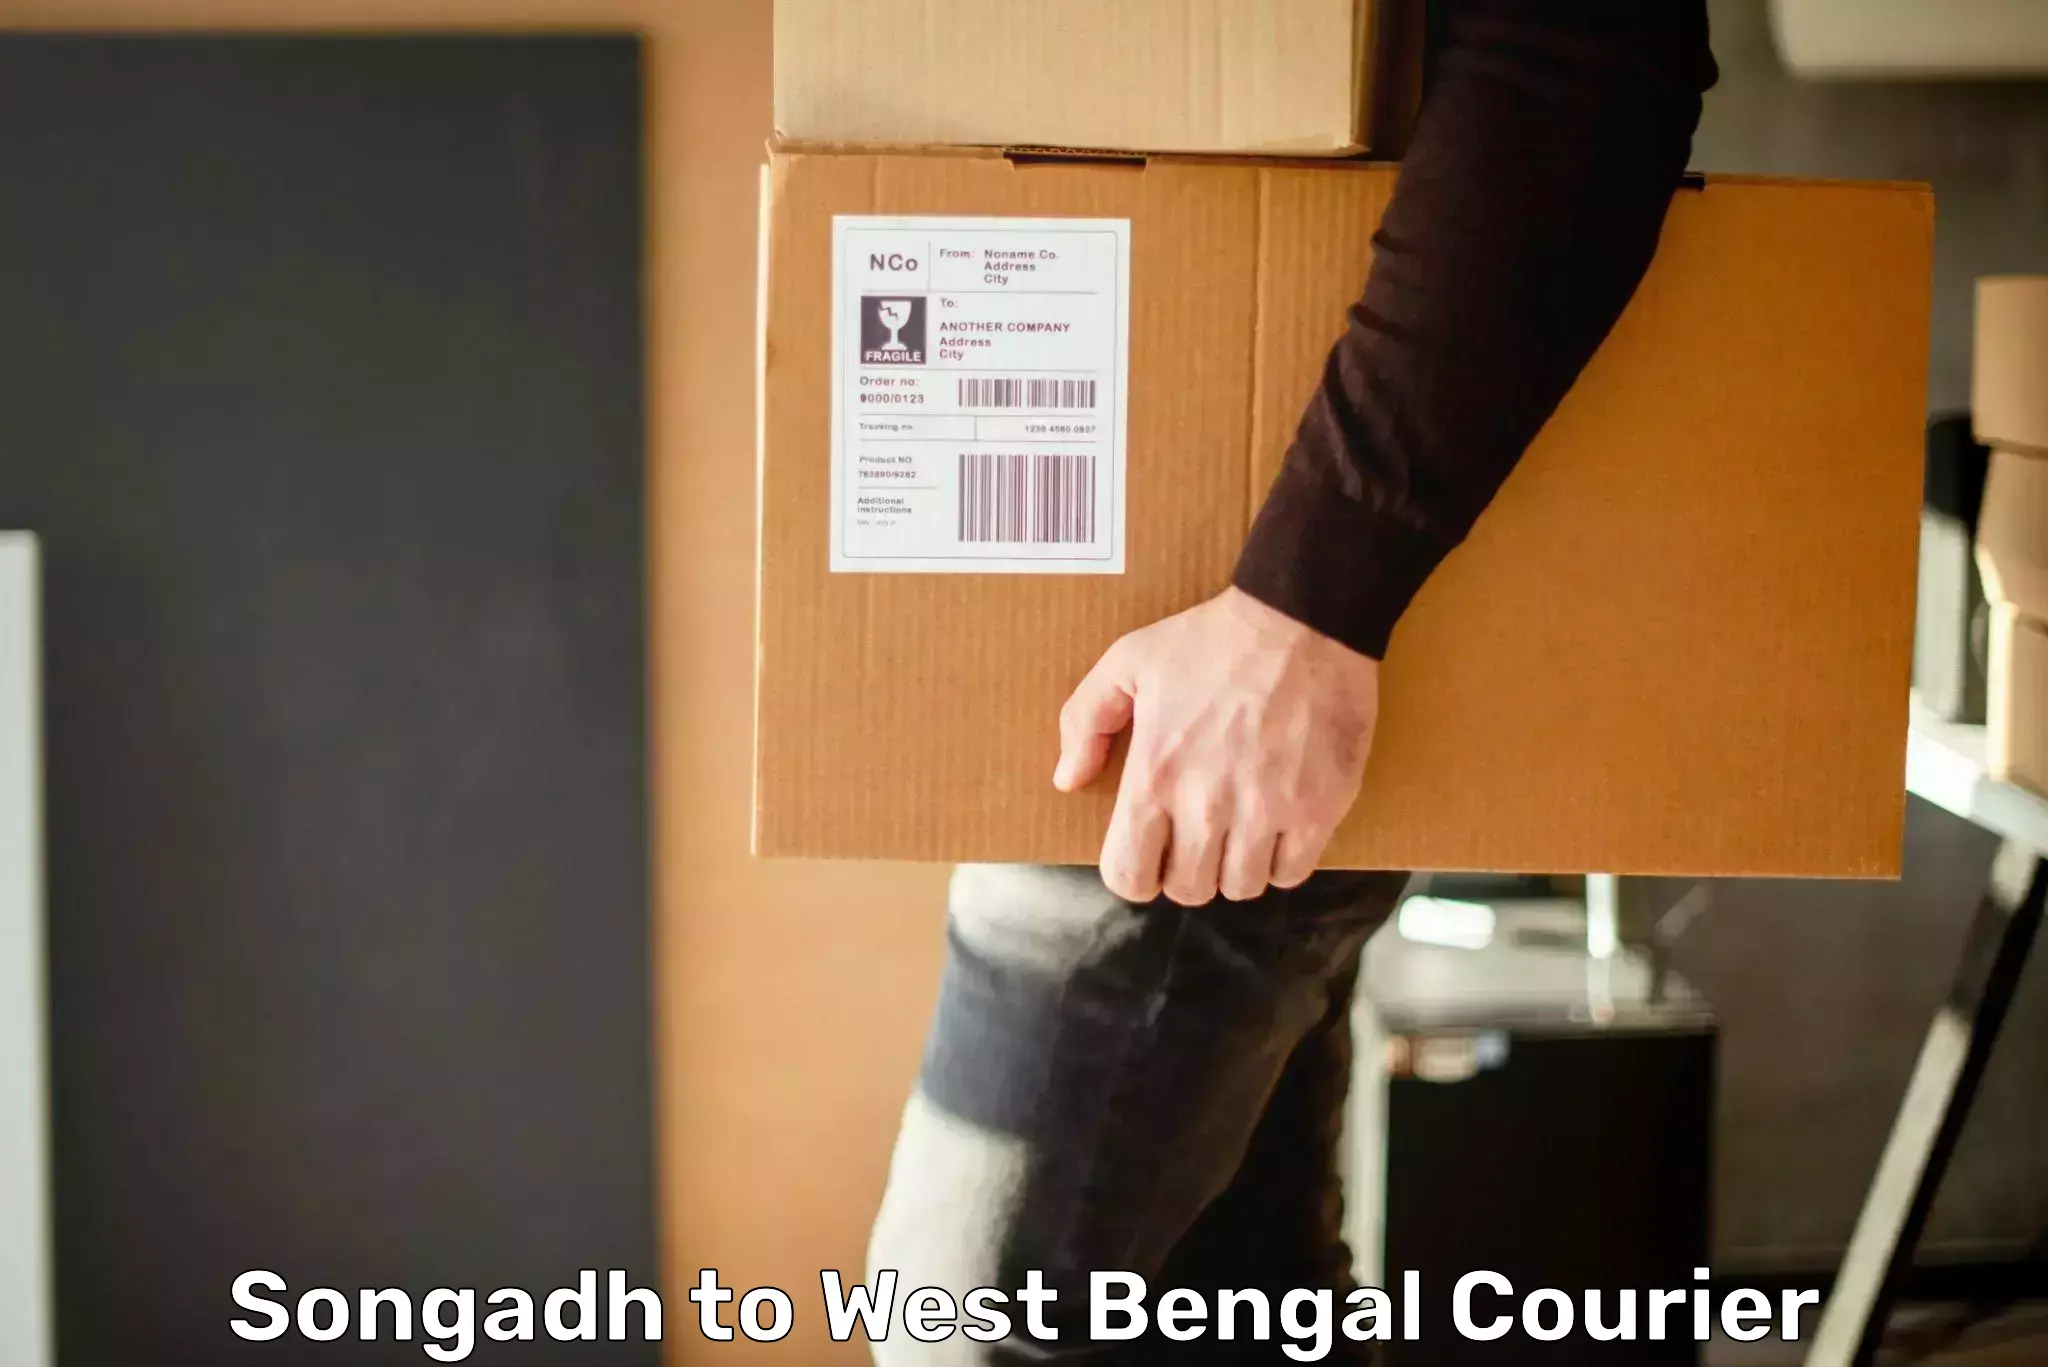 Doorstep delivery service Songadh to West Bengal